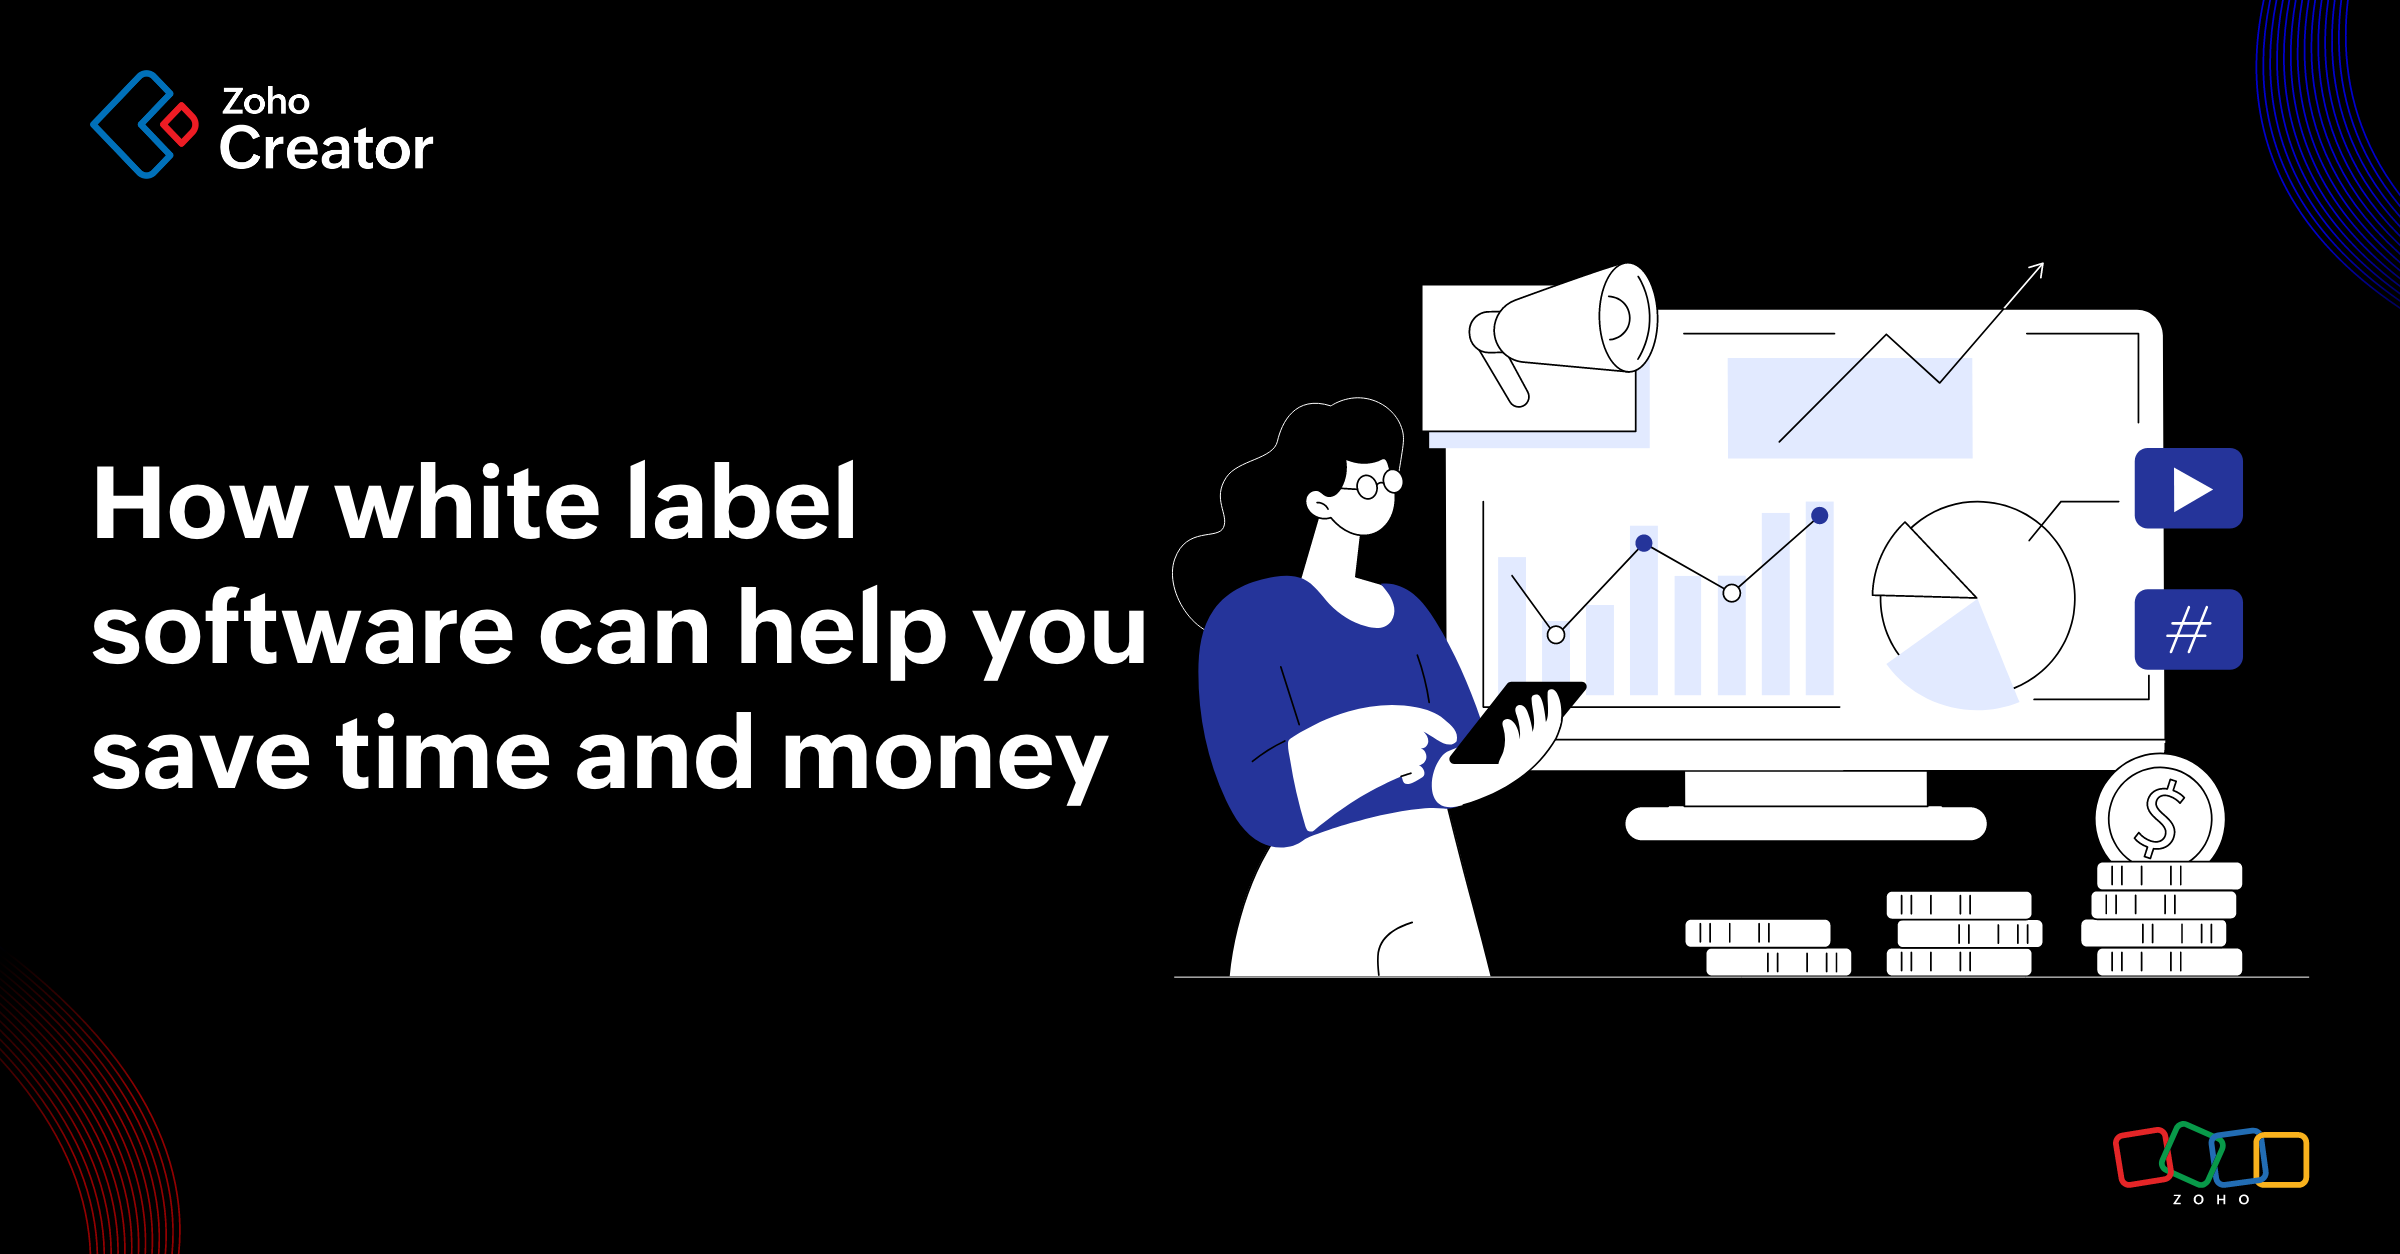 white label software can save time and money